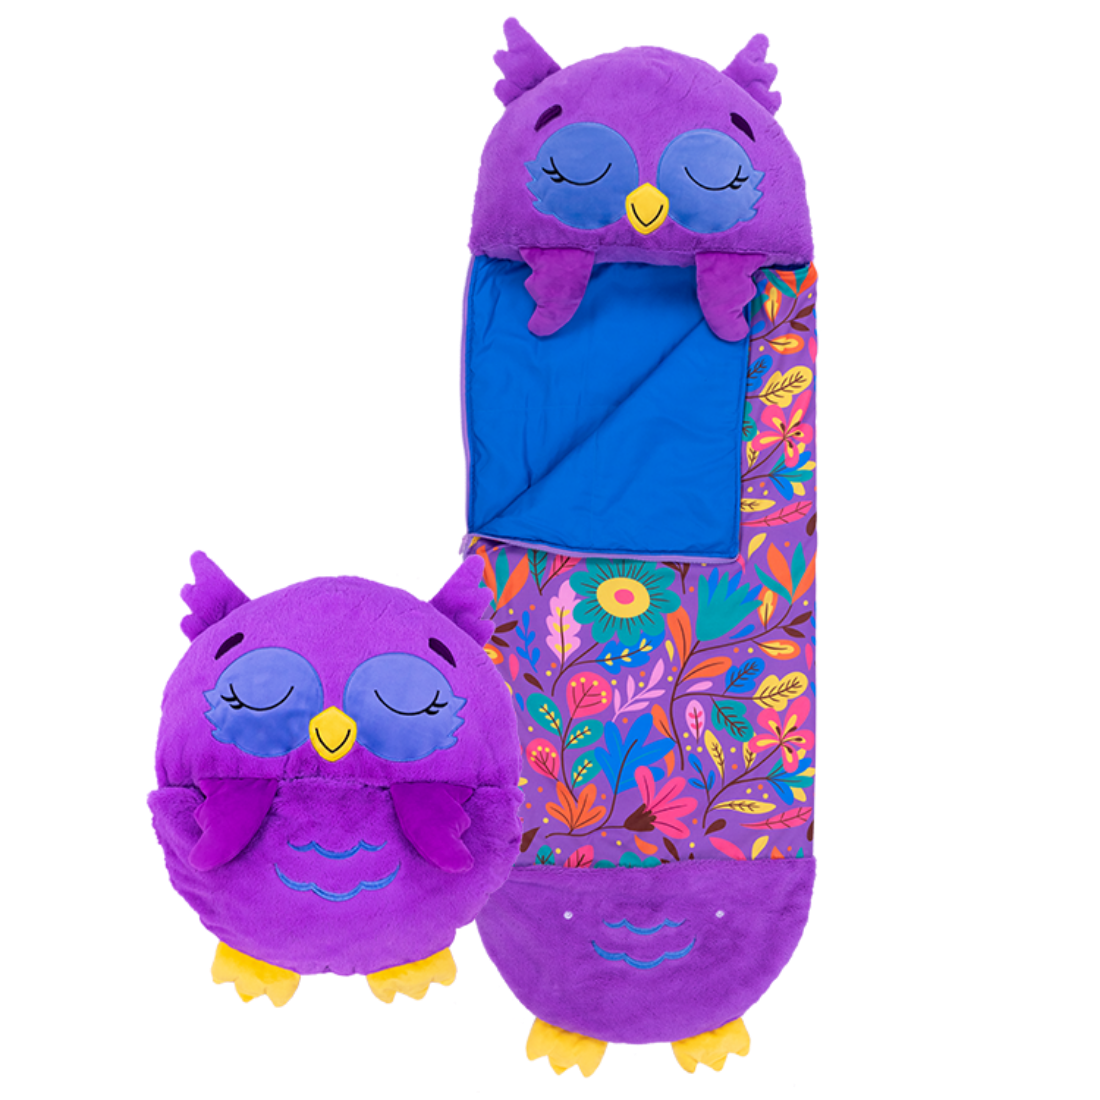 View Happy Nappers Purple Owl Large Ages 7 Plush Toy That Opens To A Fun Sleeping Bag High Street TV information